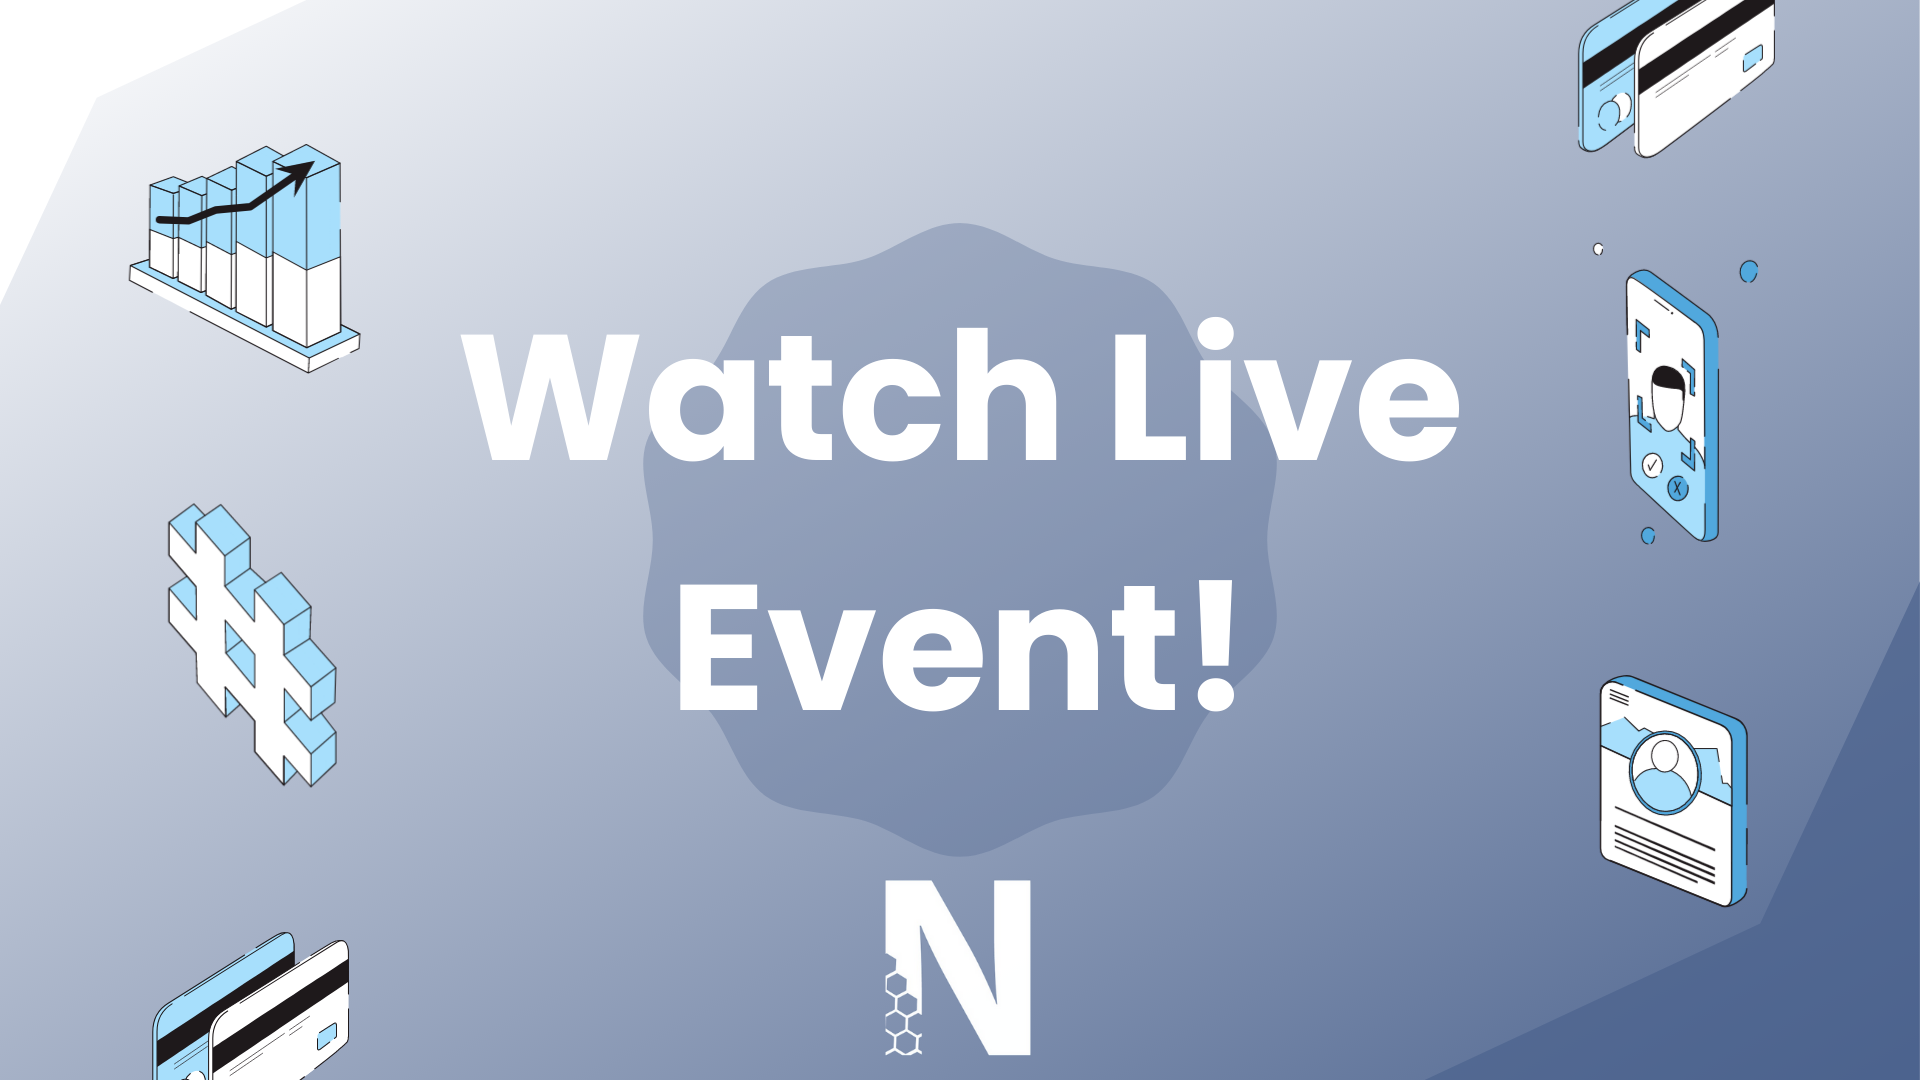 LinkedIn Live Events To Nurture and Convert Prospects